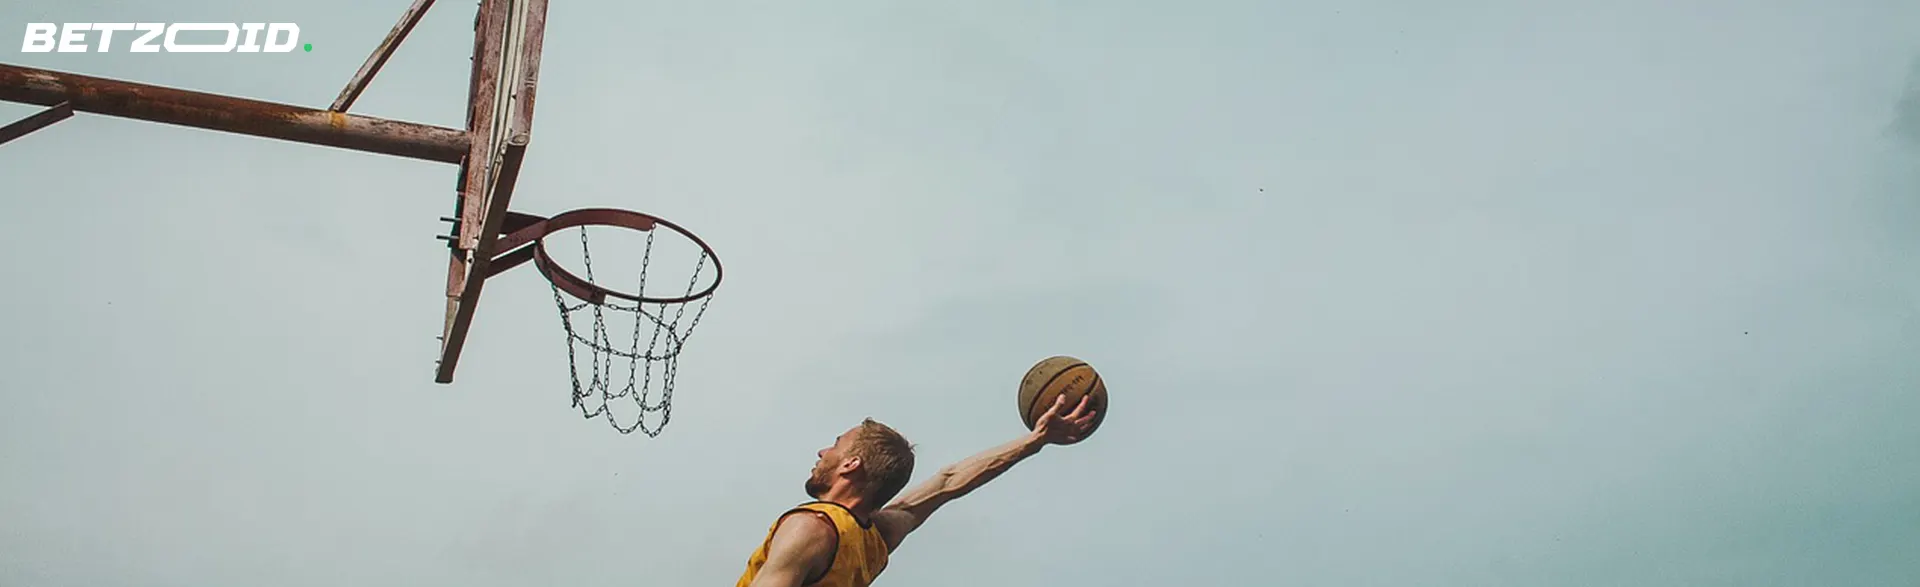 A basketball player in a yellow tank top performing a layup at an outdoor basketball hoop against a clear sky.